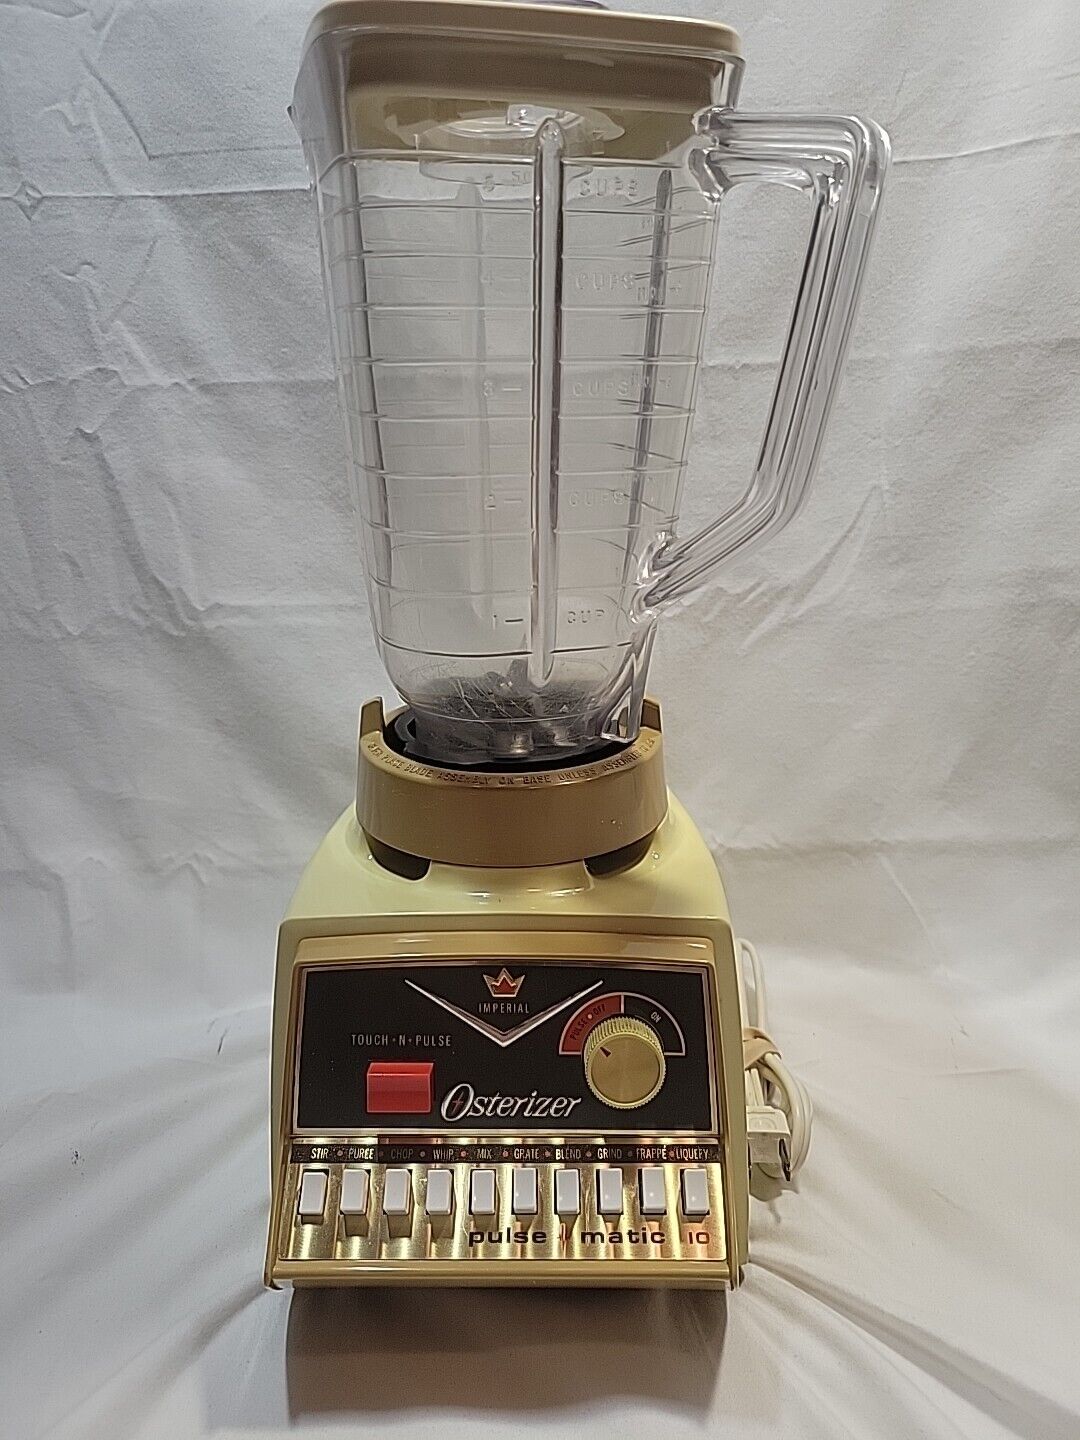 Imperial Osterizer Pulse Matic 10 / Vintage Blender / Touch-N-Pulse / Works